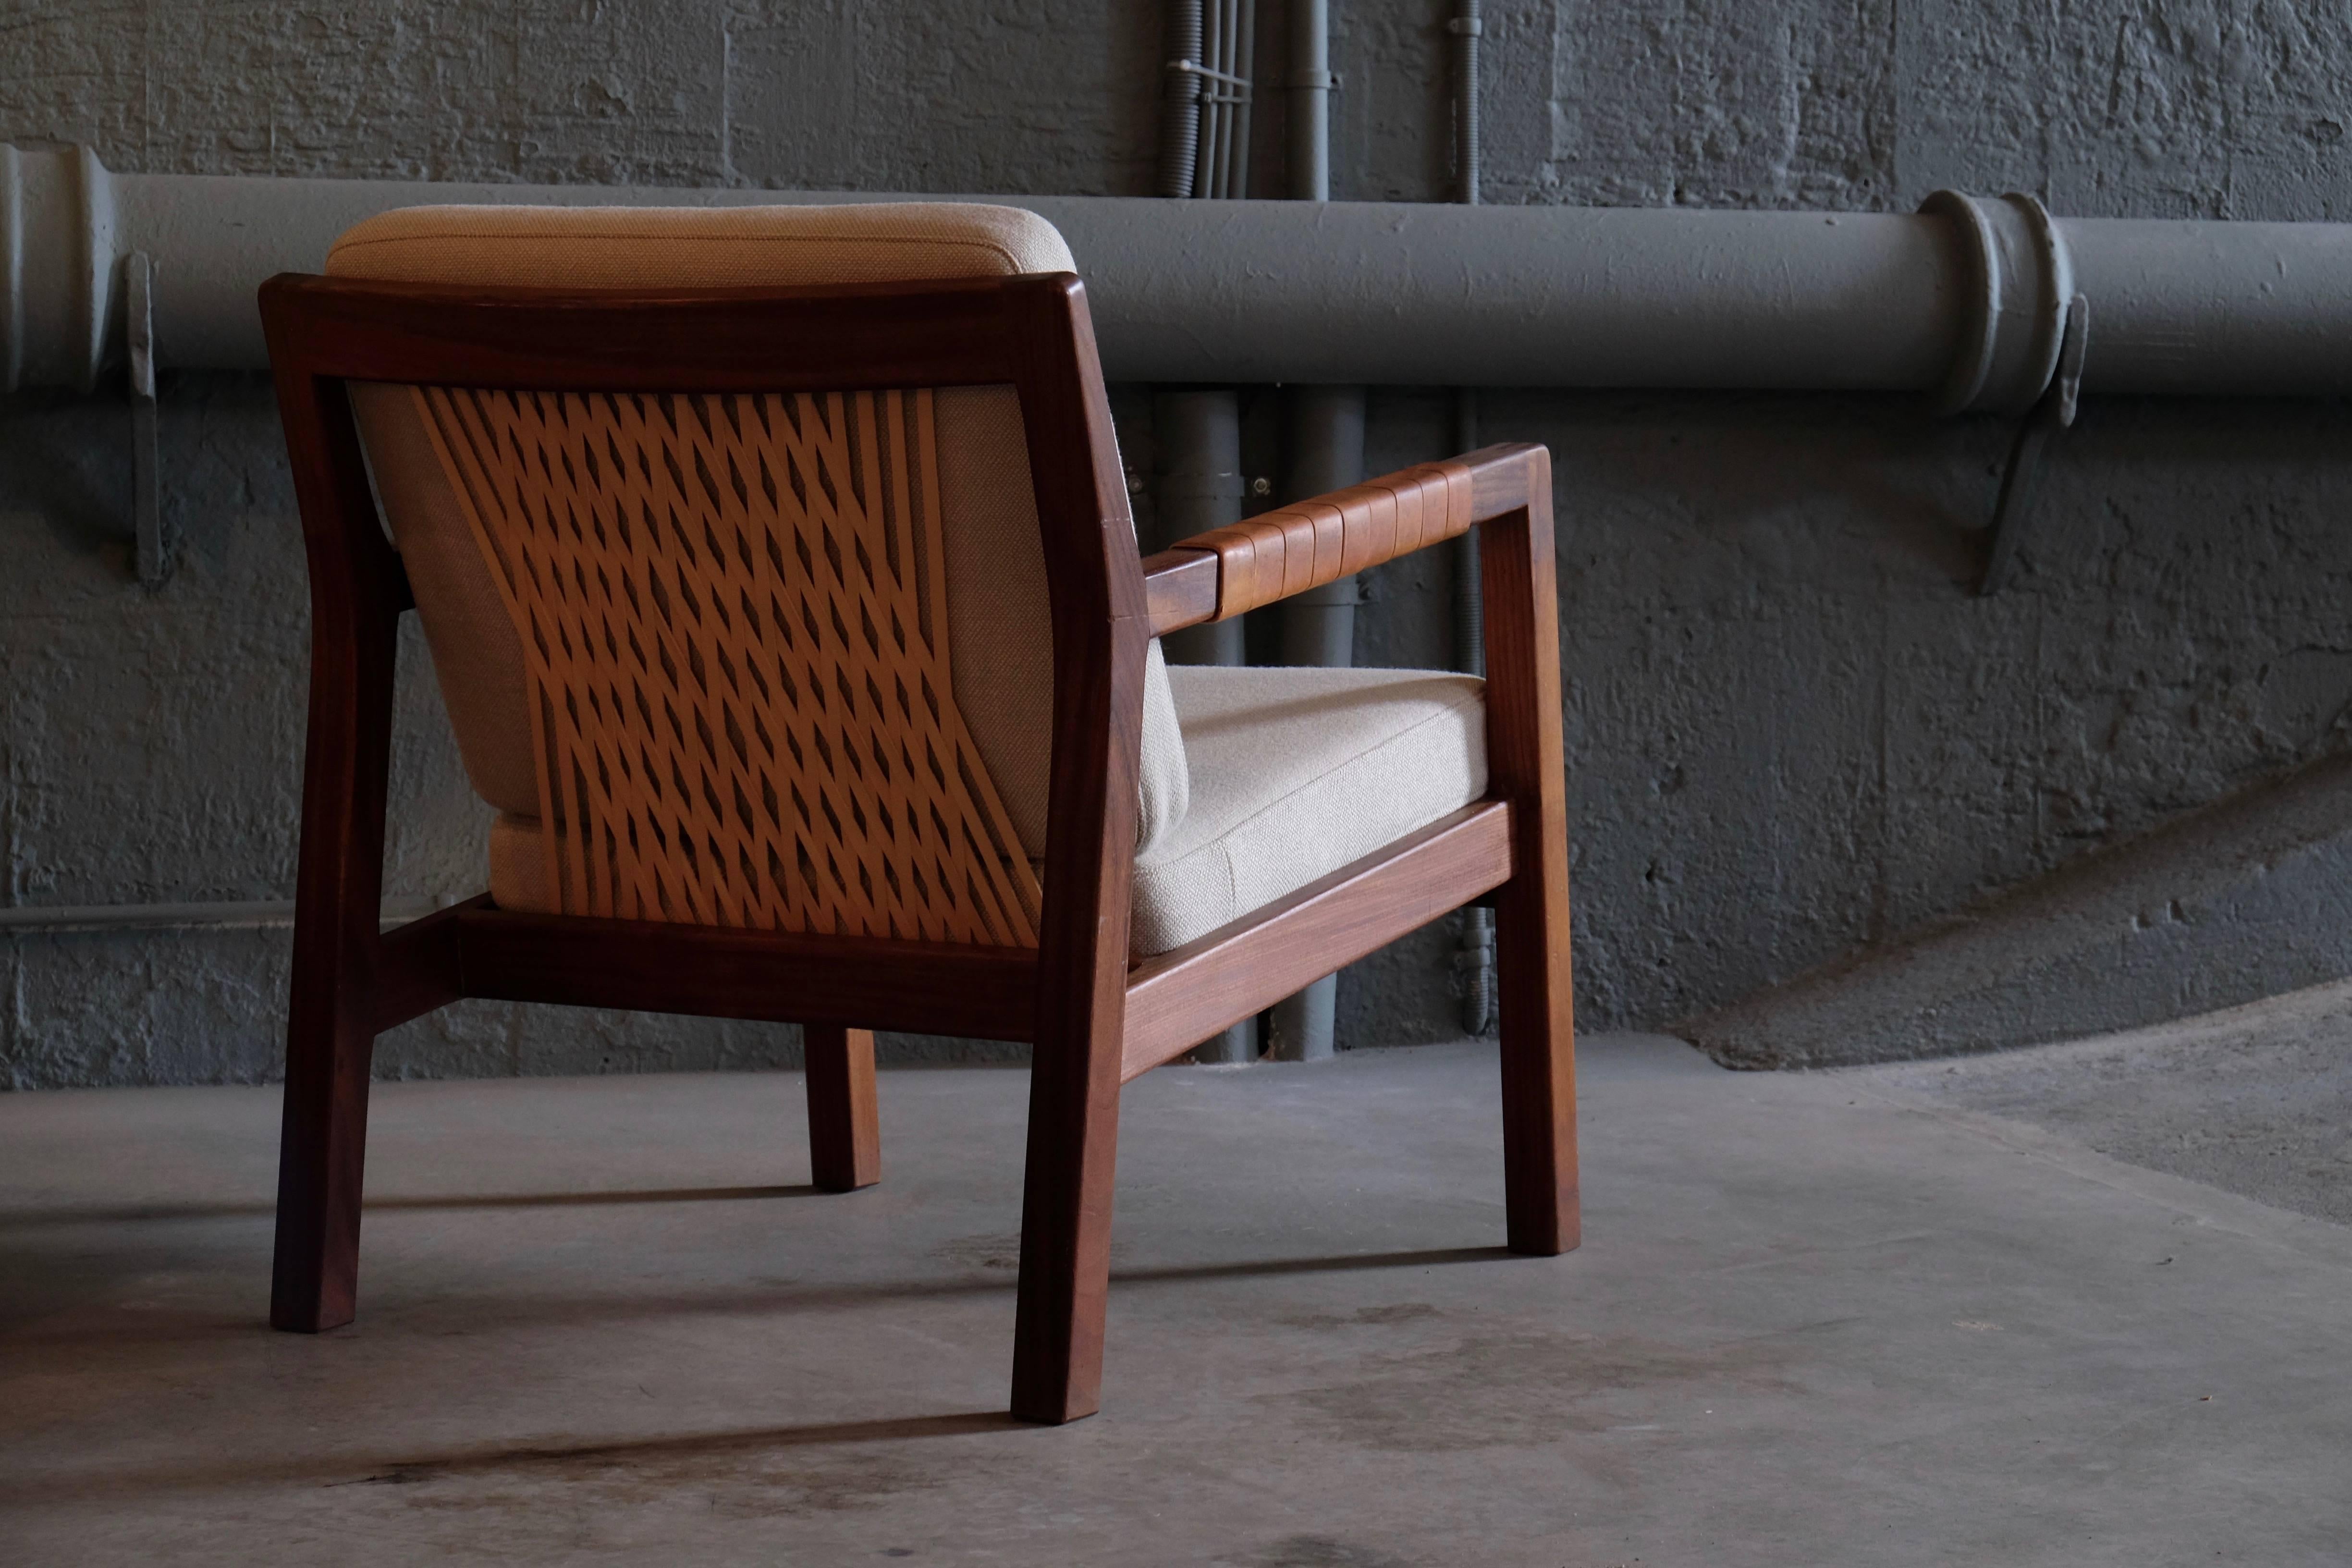 Rare armchairs model Trienna by Carl-Gustav Hiort af Orna¨s, Finland, 1950s.
Teak, leather covered armrests, back with braided leather straps, loose cushions reupholstered in Kvadrat fabric.
   
   